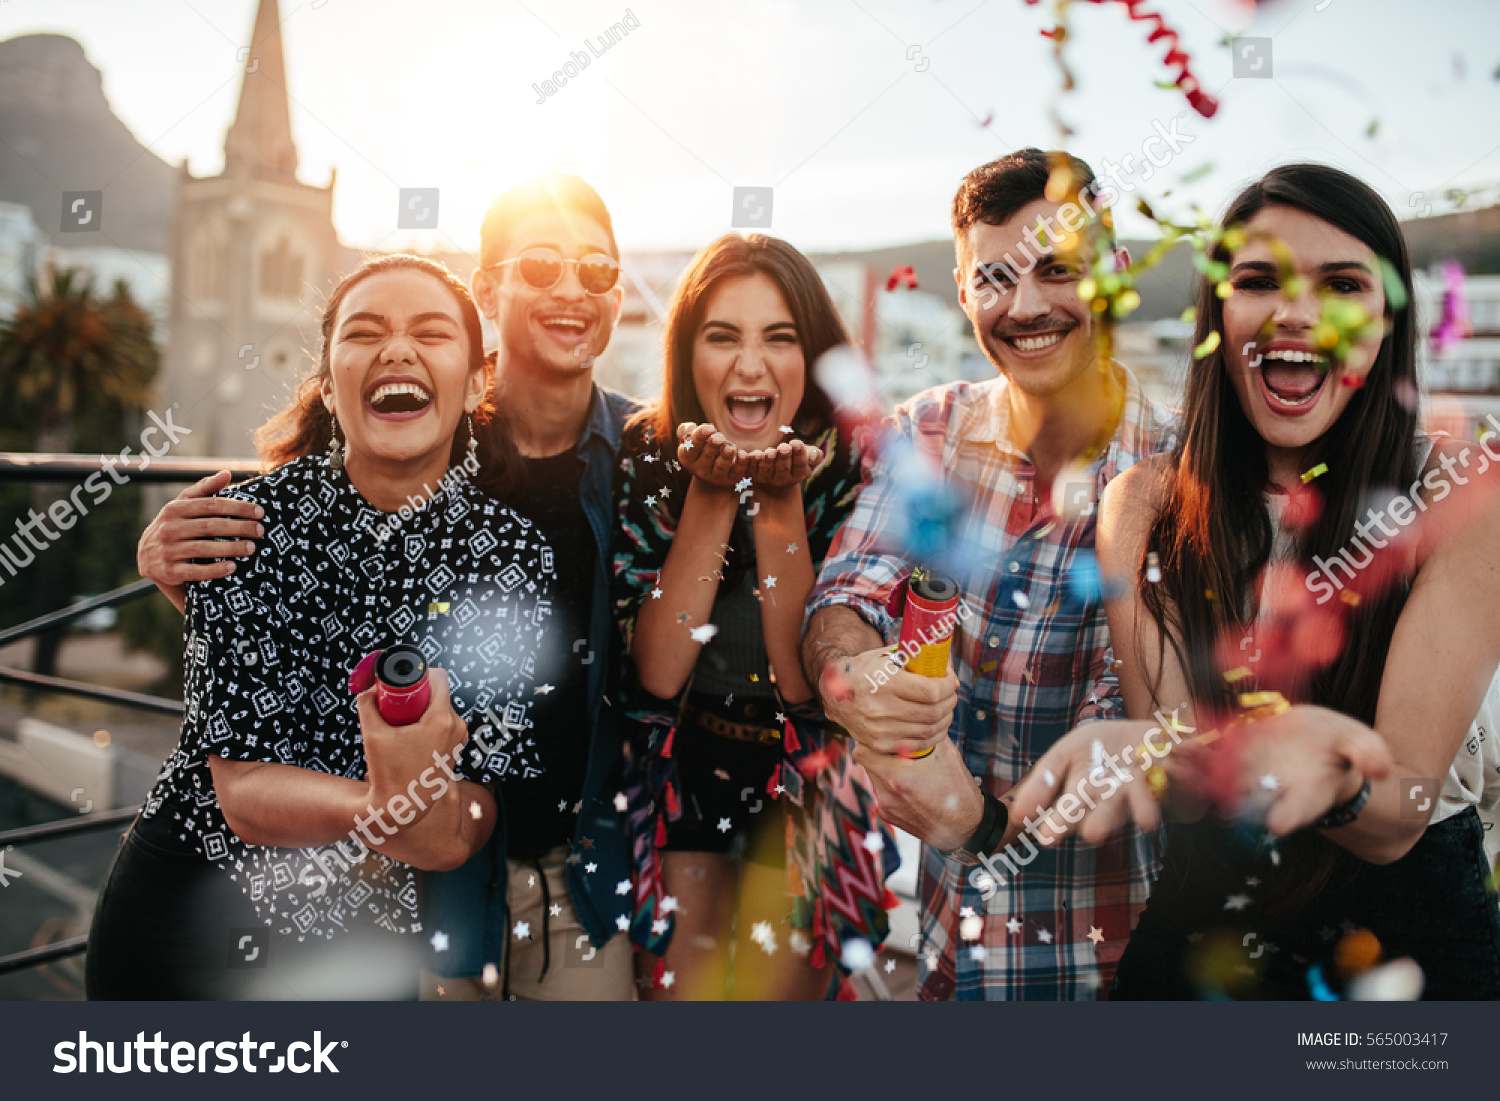 Group of friends enjoying party and throwing confetti. Friends having fun at rooftop party. #565003417